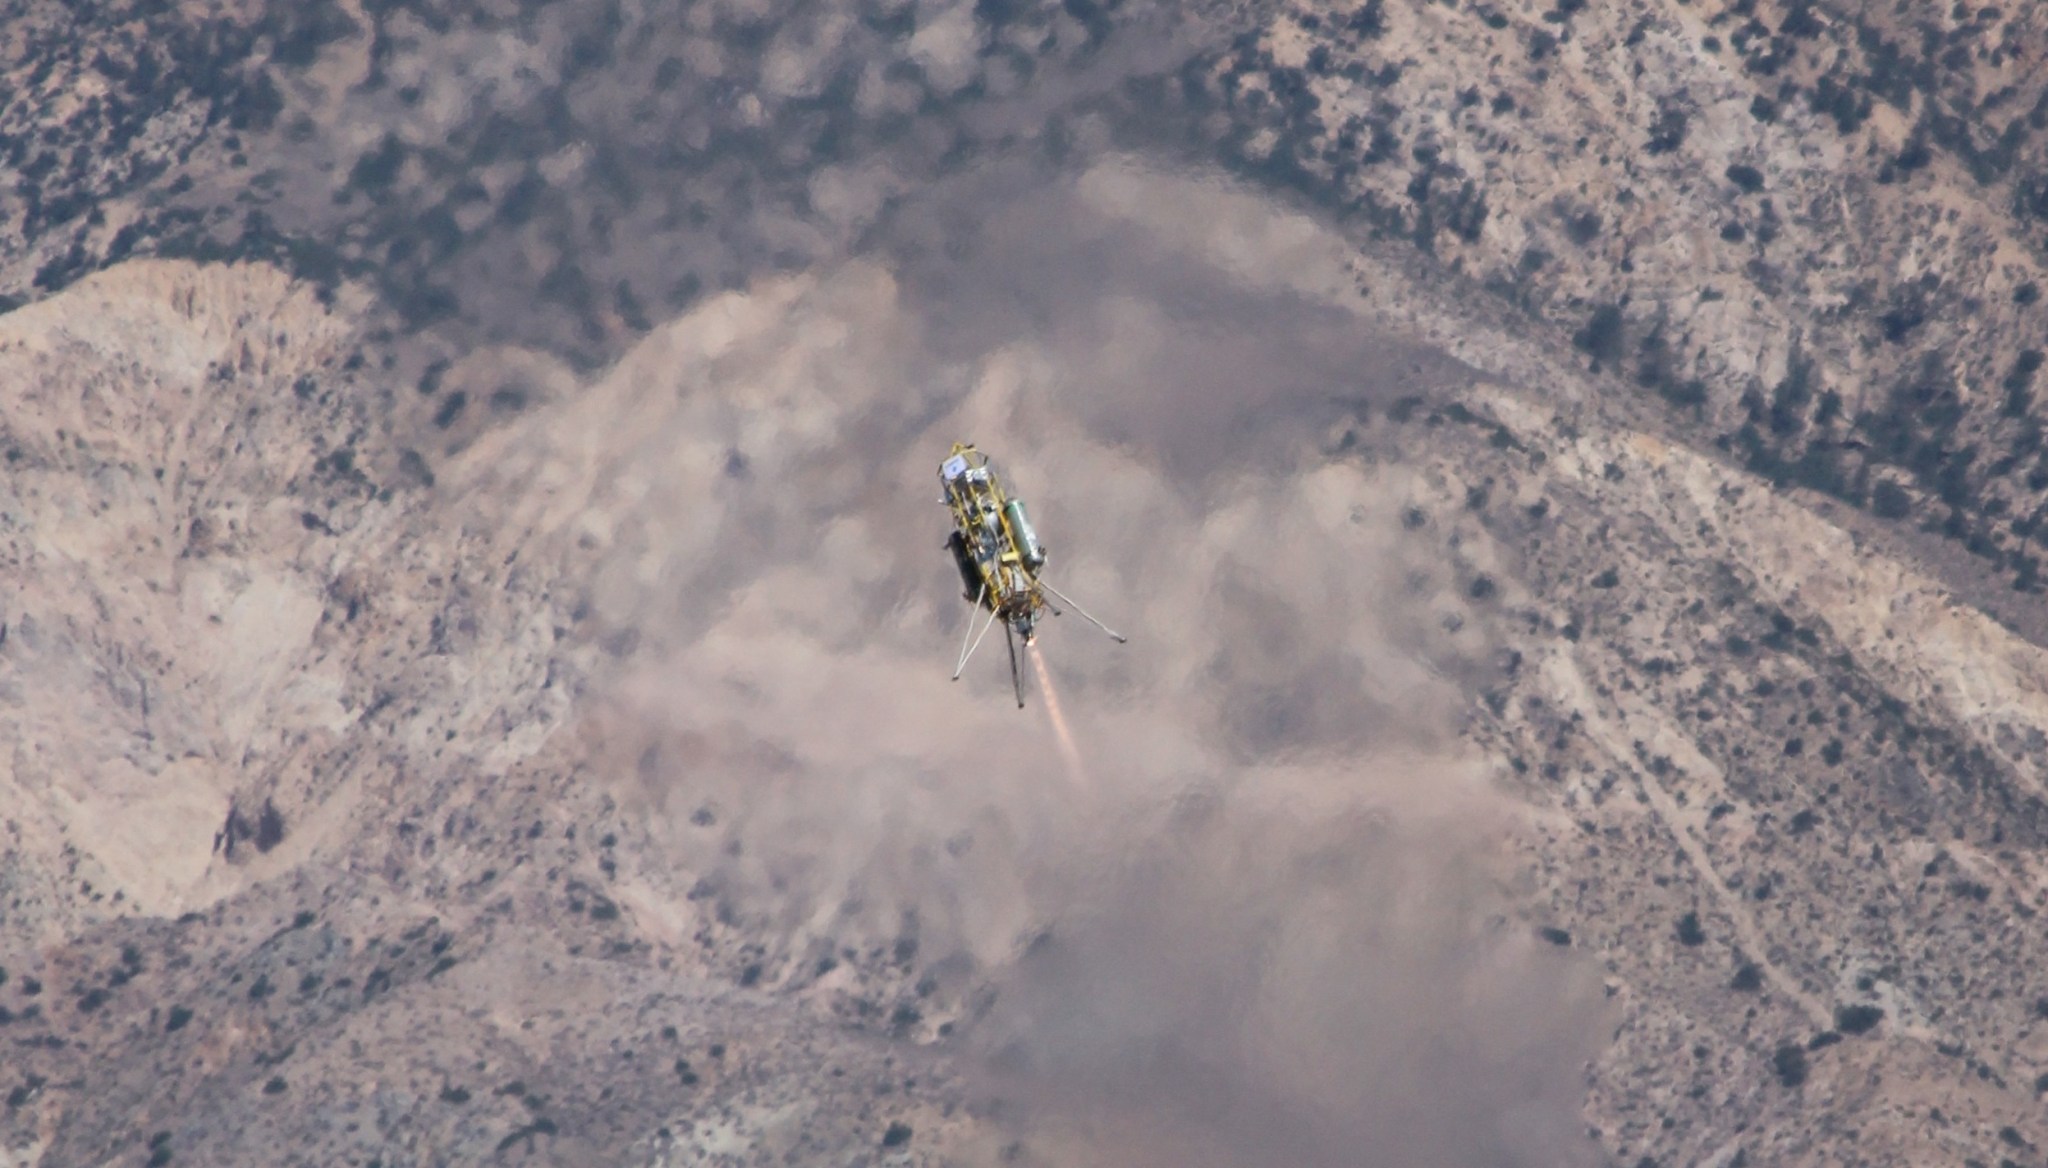 Bird's-eye view of Xombie flying above a hilly desert landscape